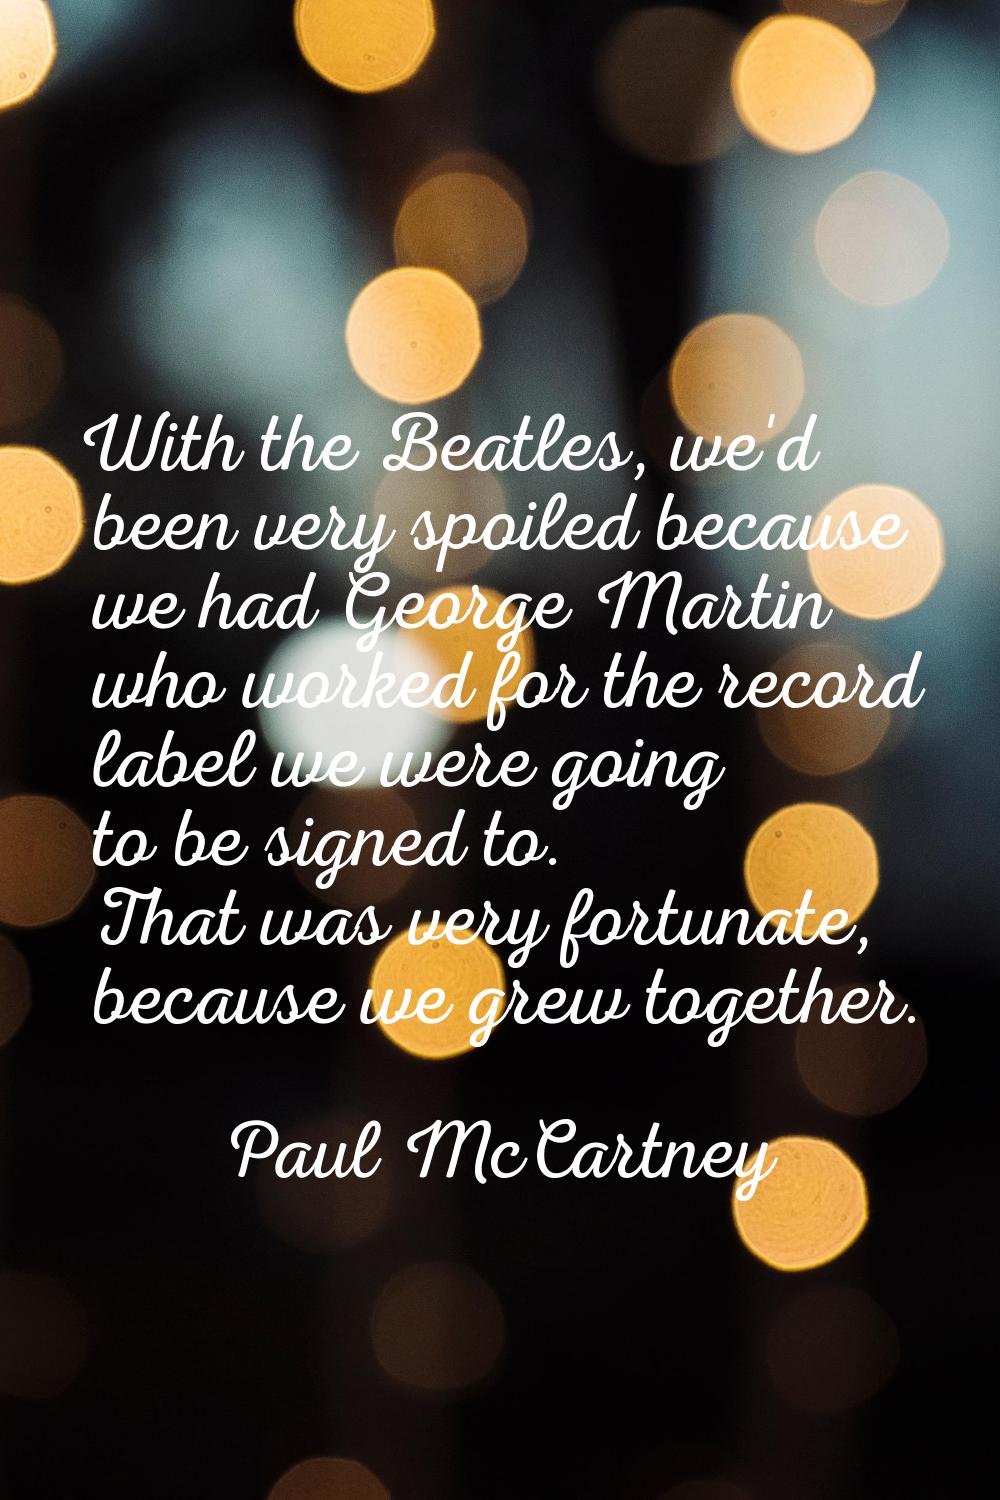 With the Beatles, we'd been very spoiled because we had George Martin who worked for the record lab